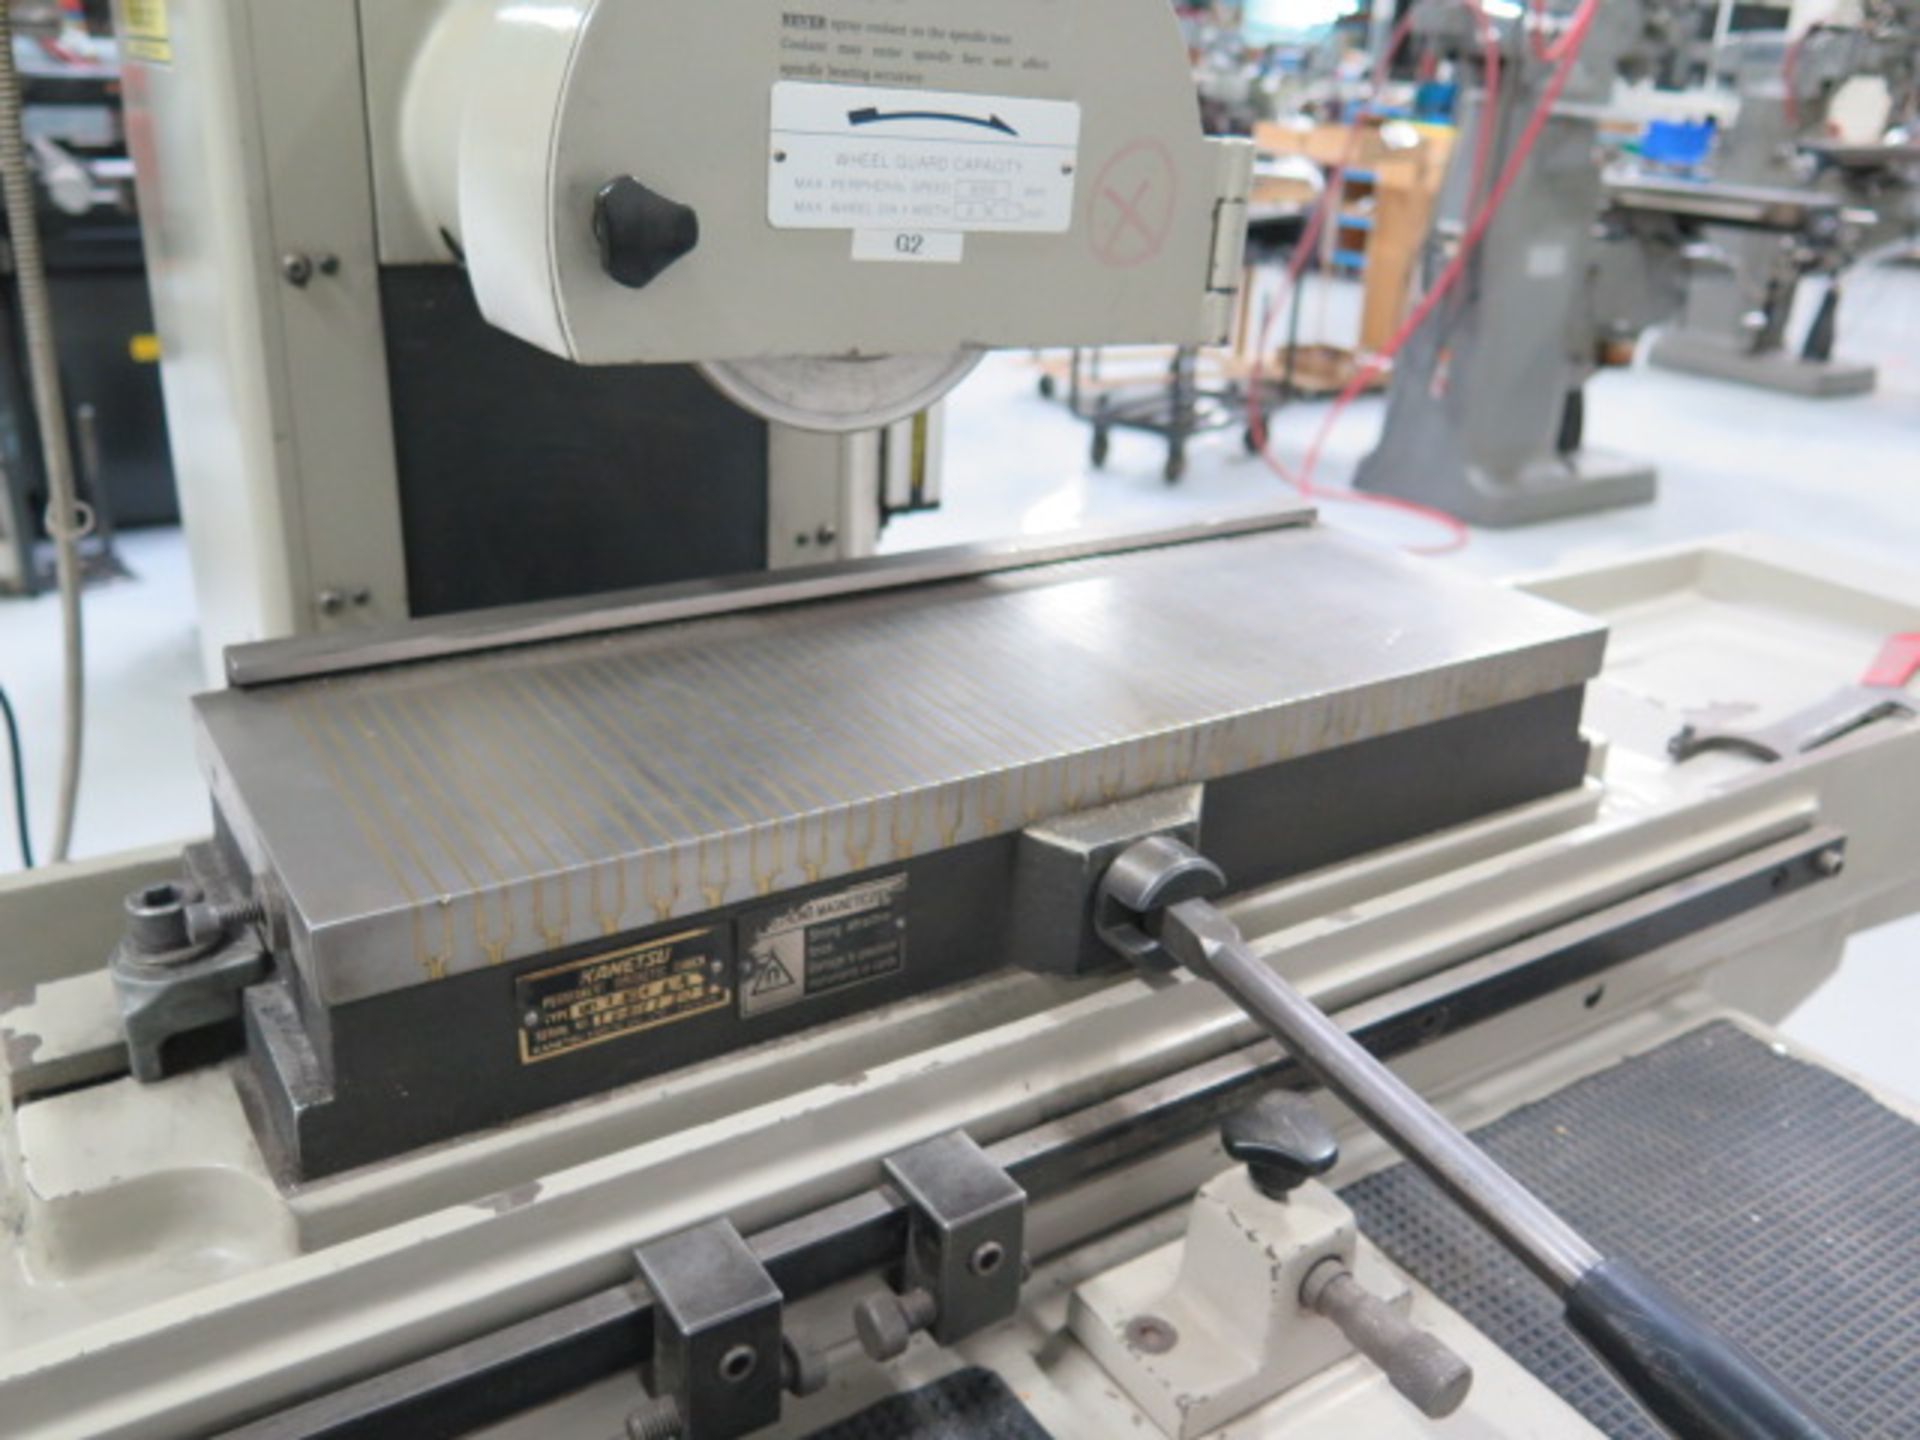 Okamoto “6-18 LINEAR” 6” x 18” Surface Grinder s/n 4469 w/ Mitutoyo UDR-220 Program DRO, SOLD AS IS - Image 7 of 15